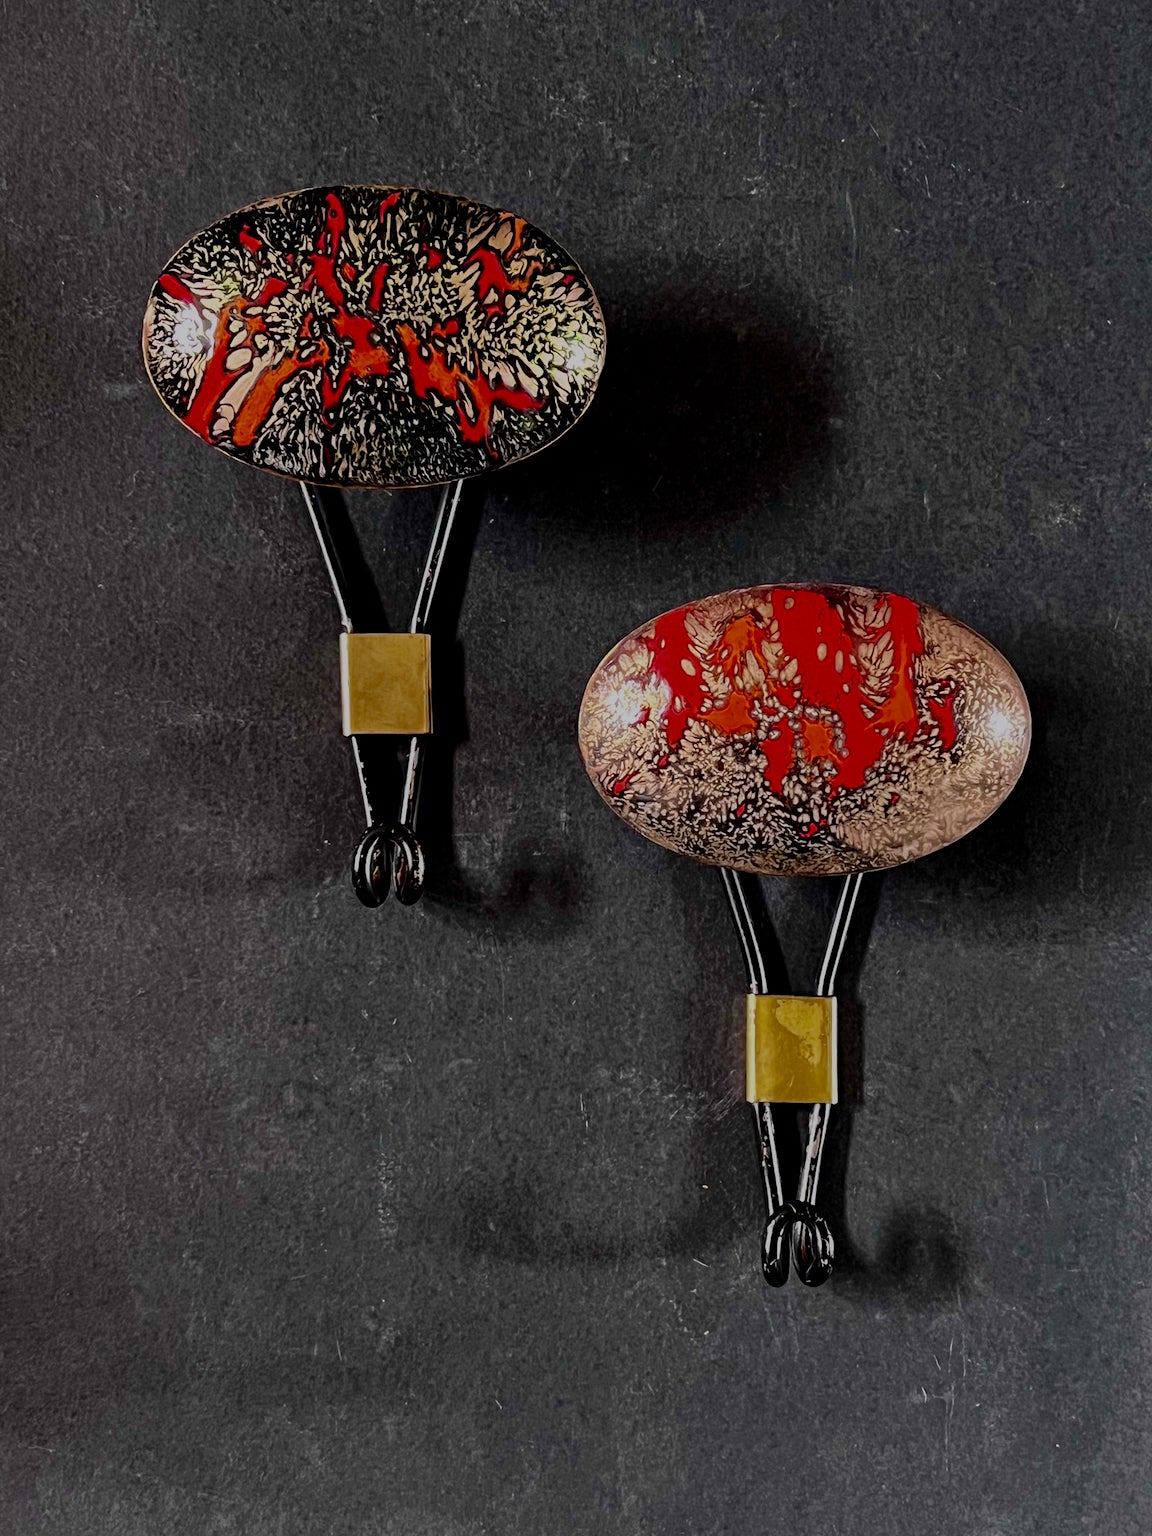 A set of two large handmade coat hooks decorated with enamel. Italy, mid-20th century.

Each piece comprises a black metal frame with a hook below and a decorative, domed enamel hanging point above. The enamel is nicely made in tones of red and